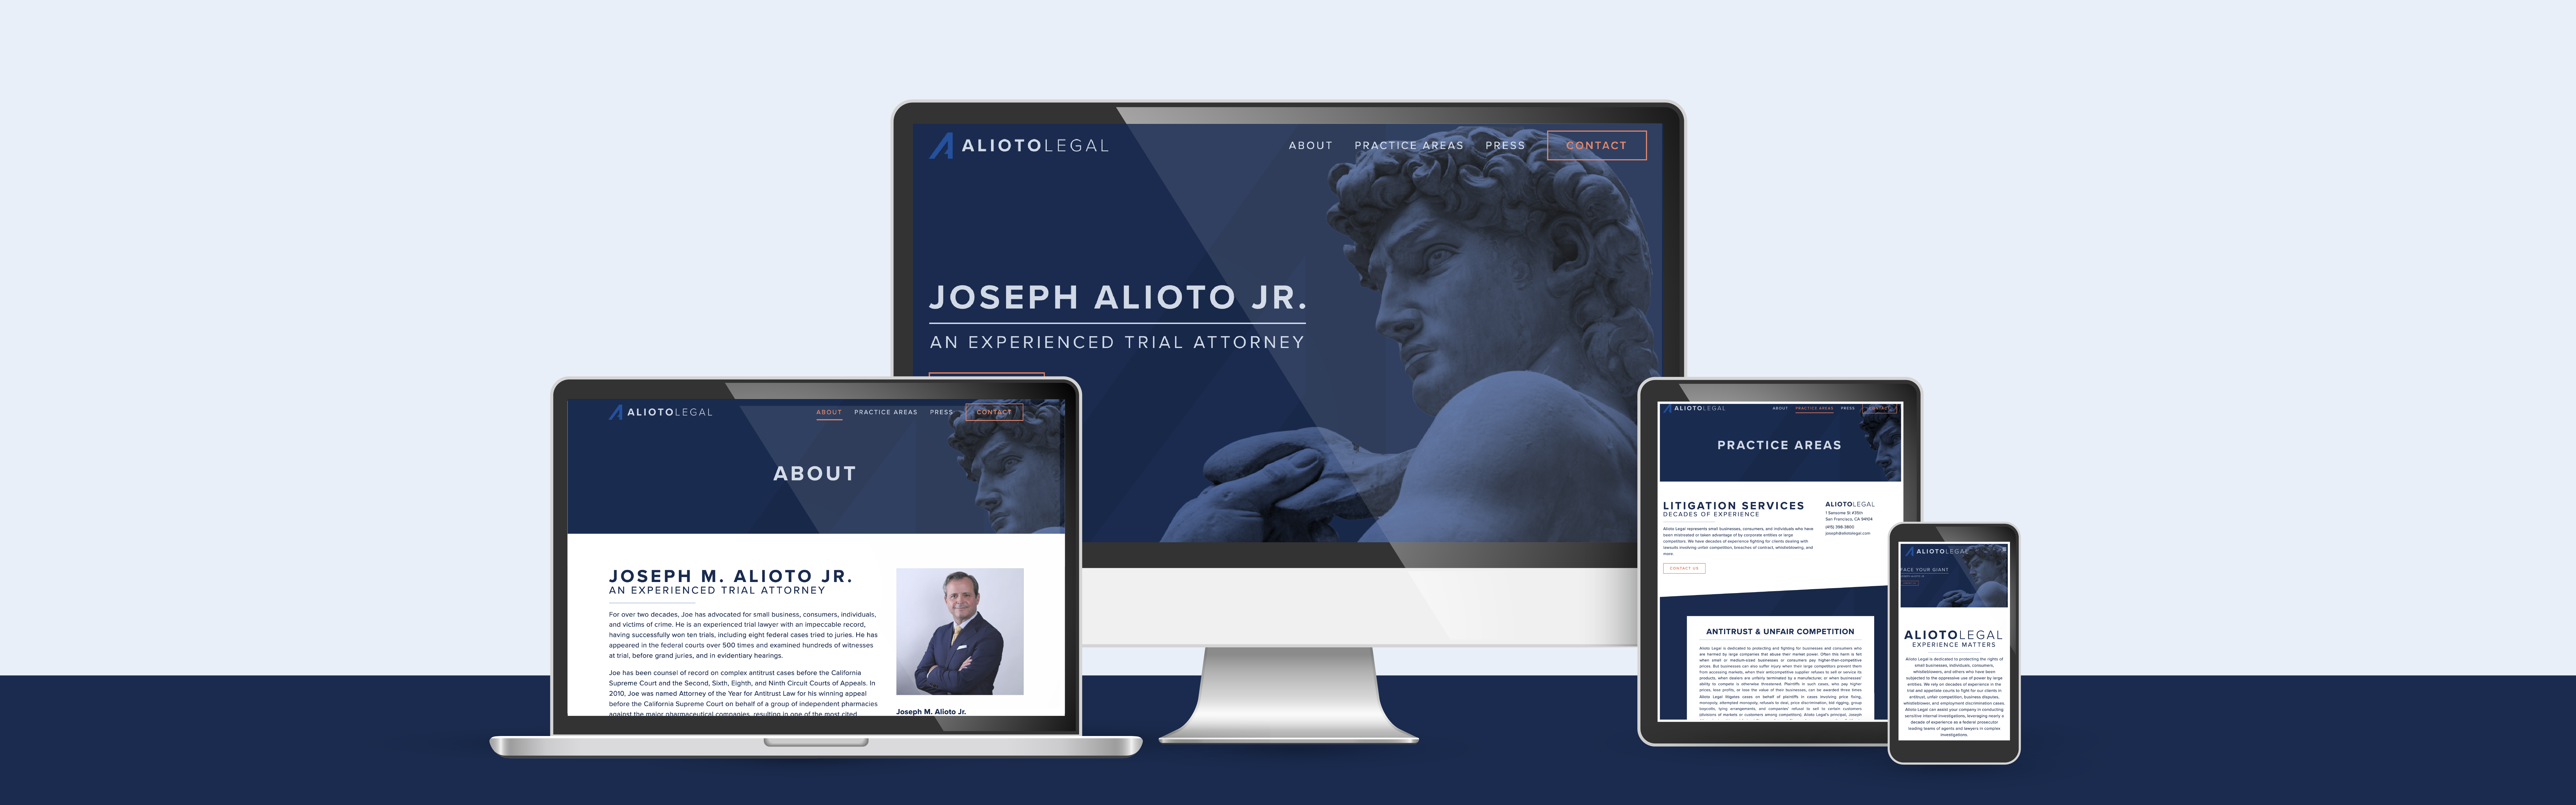 Responsive website design displayed across a desktop monitor, a tablet, and a smartphone, showcasing Alioto Legal's online presence with a focus on an attorney named Joseph Alioto Jr.